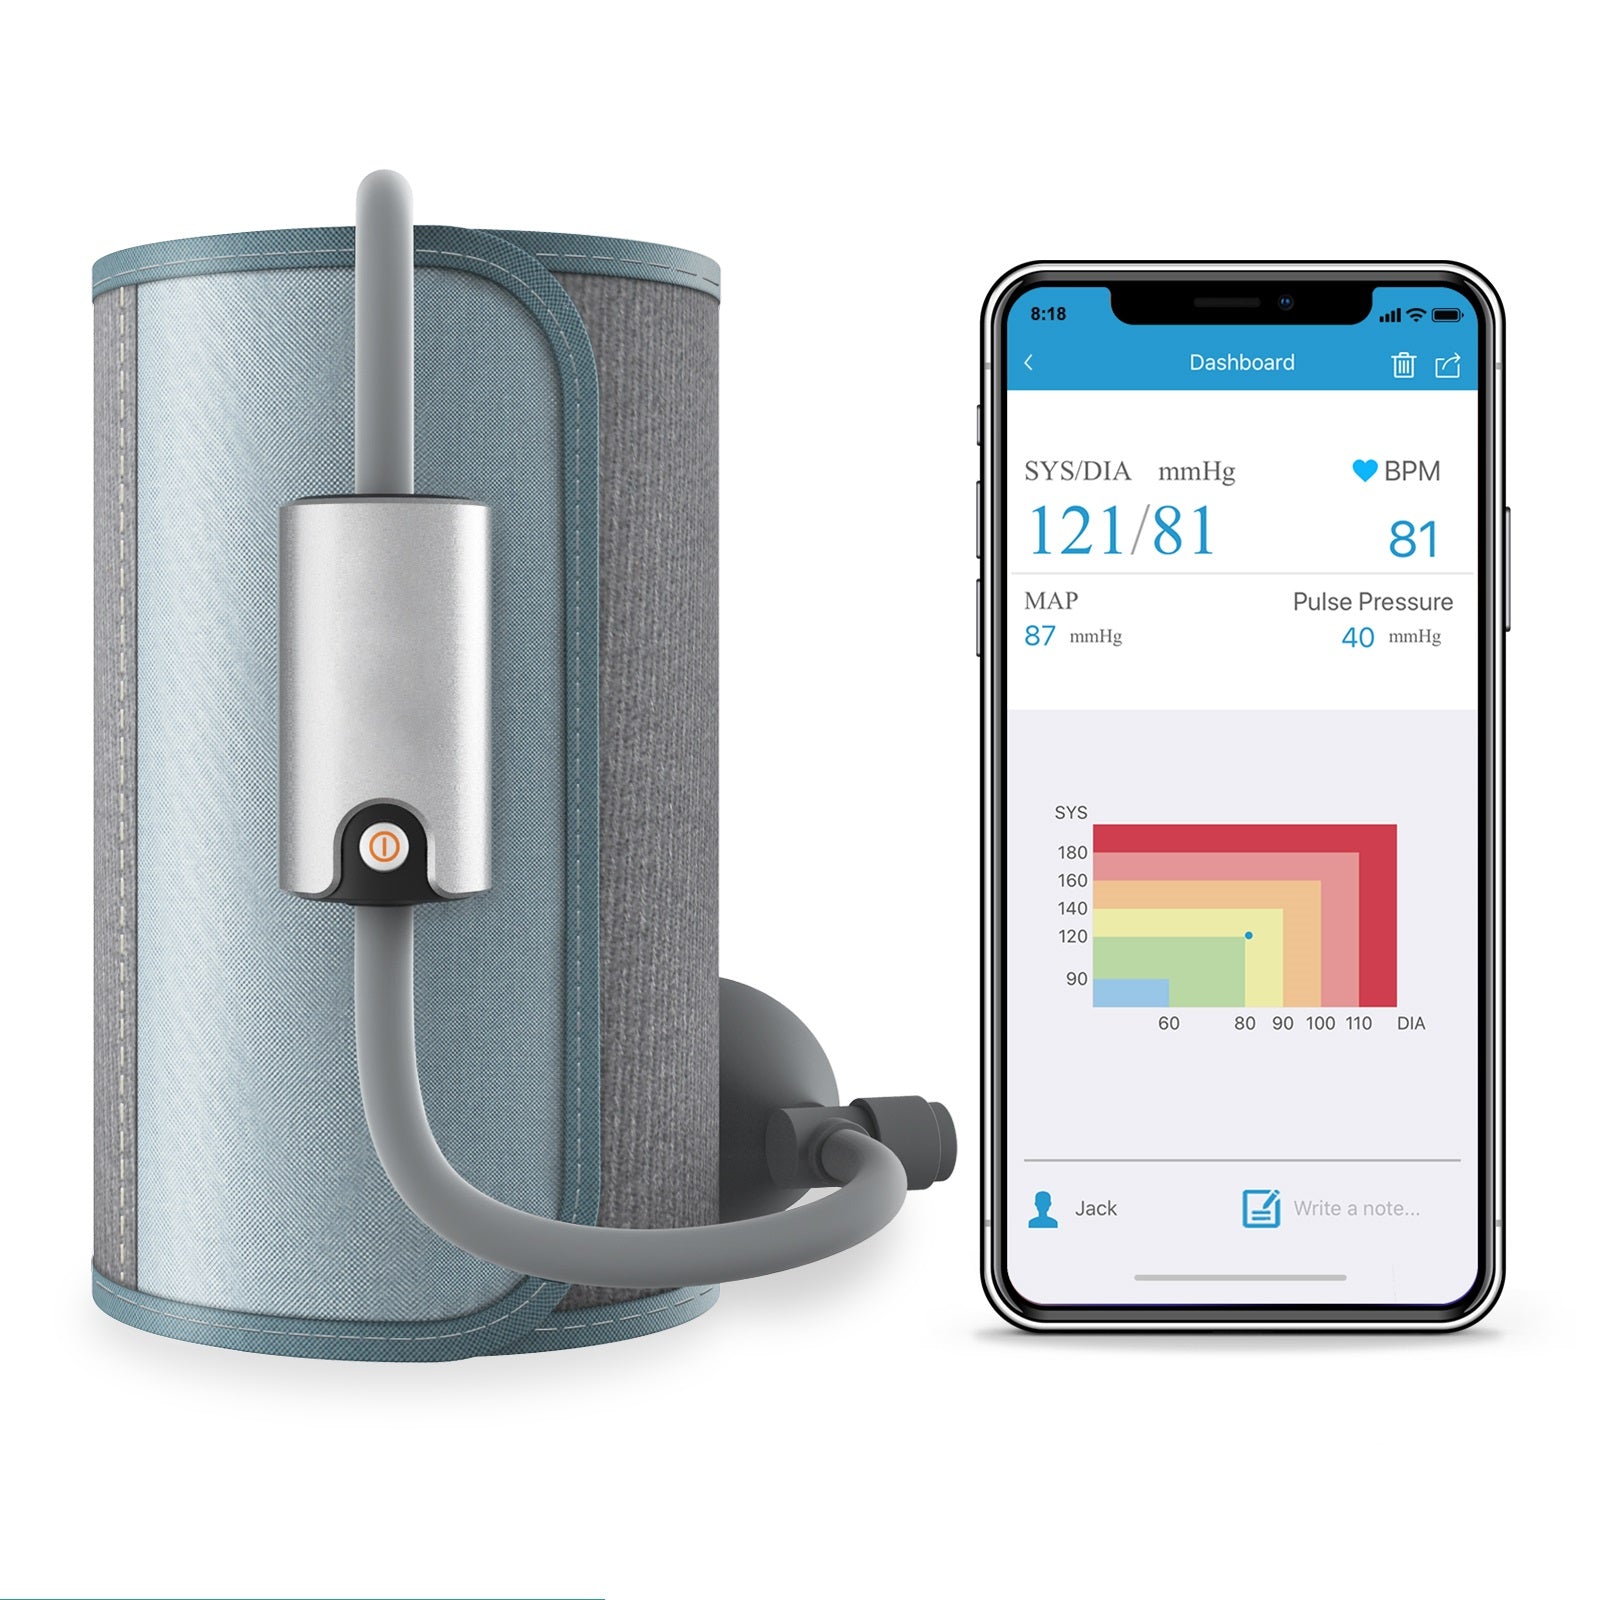 Withings offers blood pressure monitor for iPhone